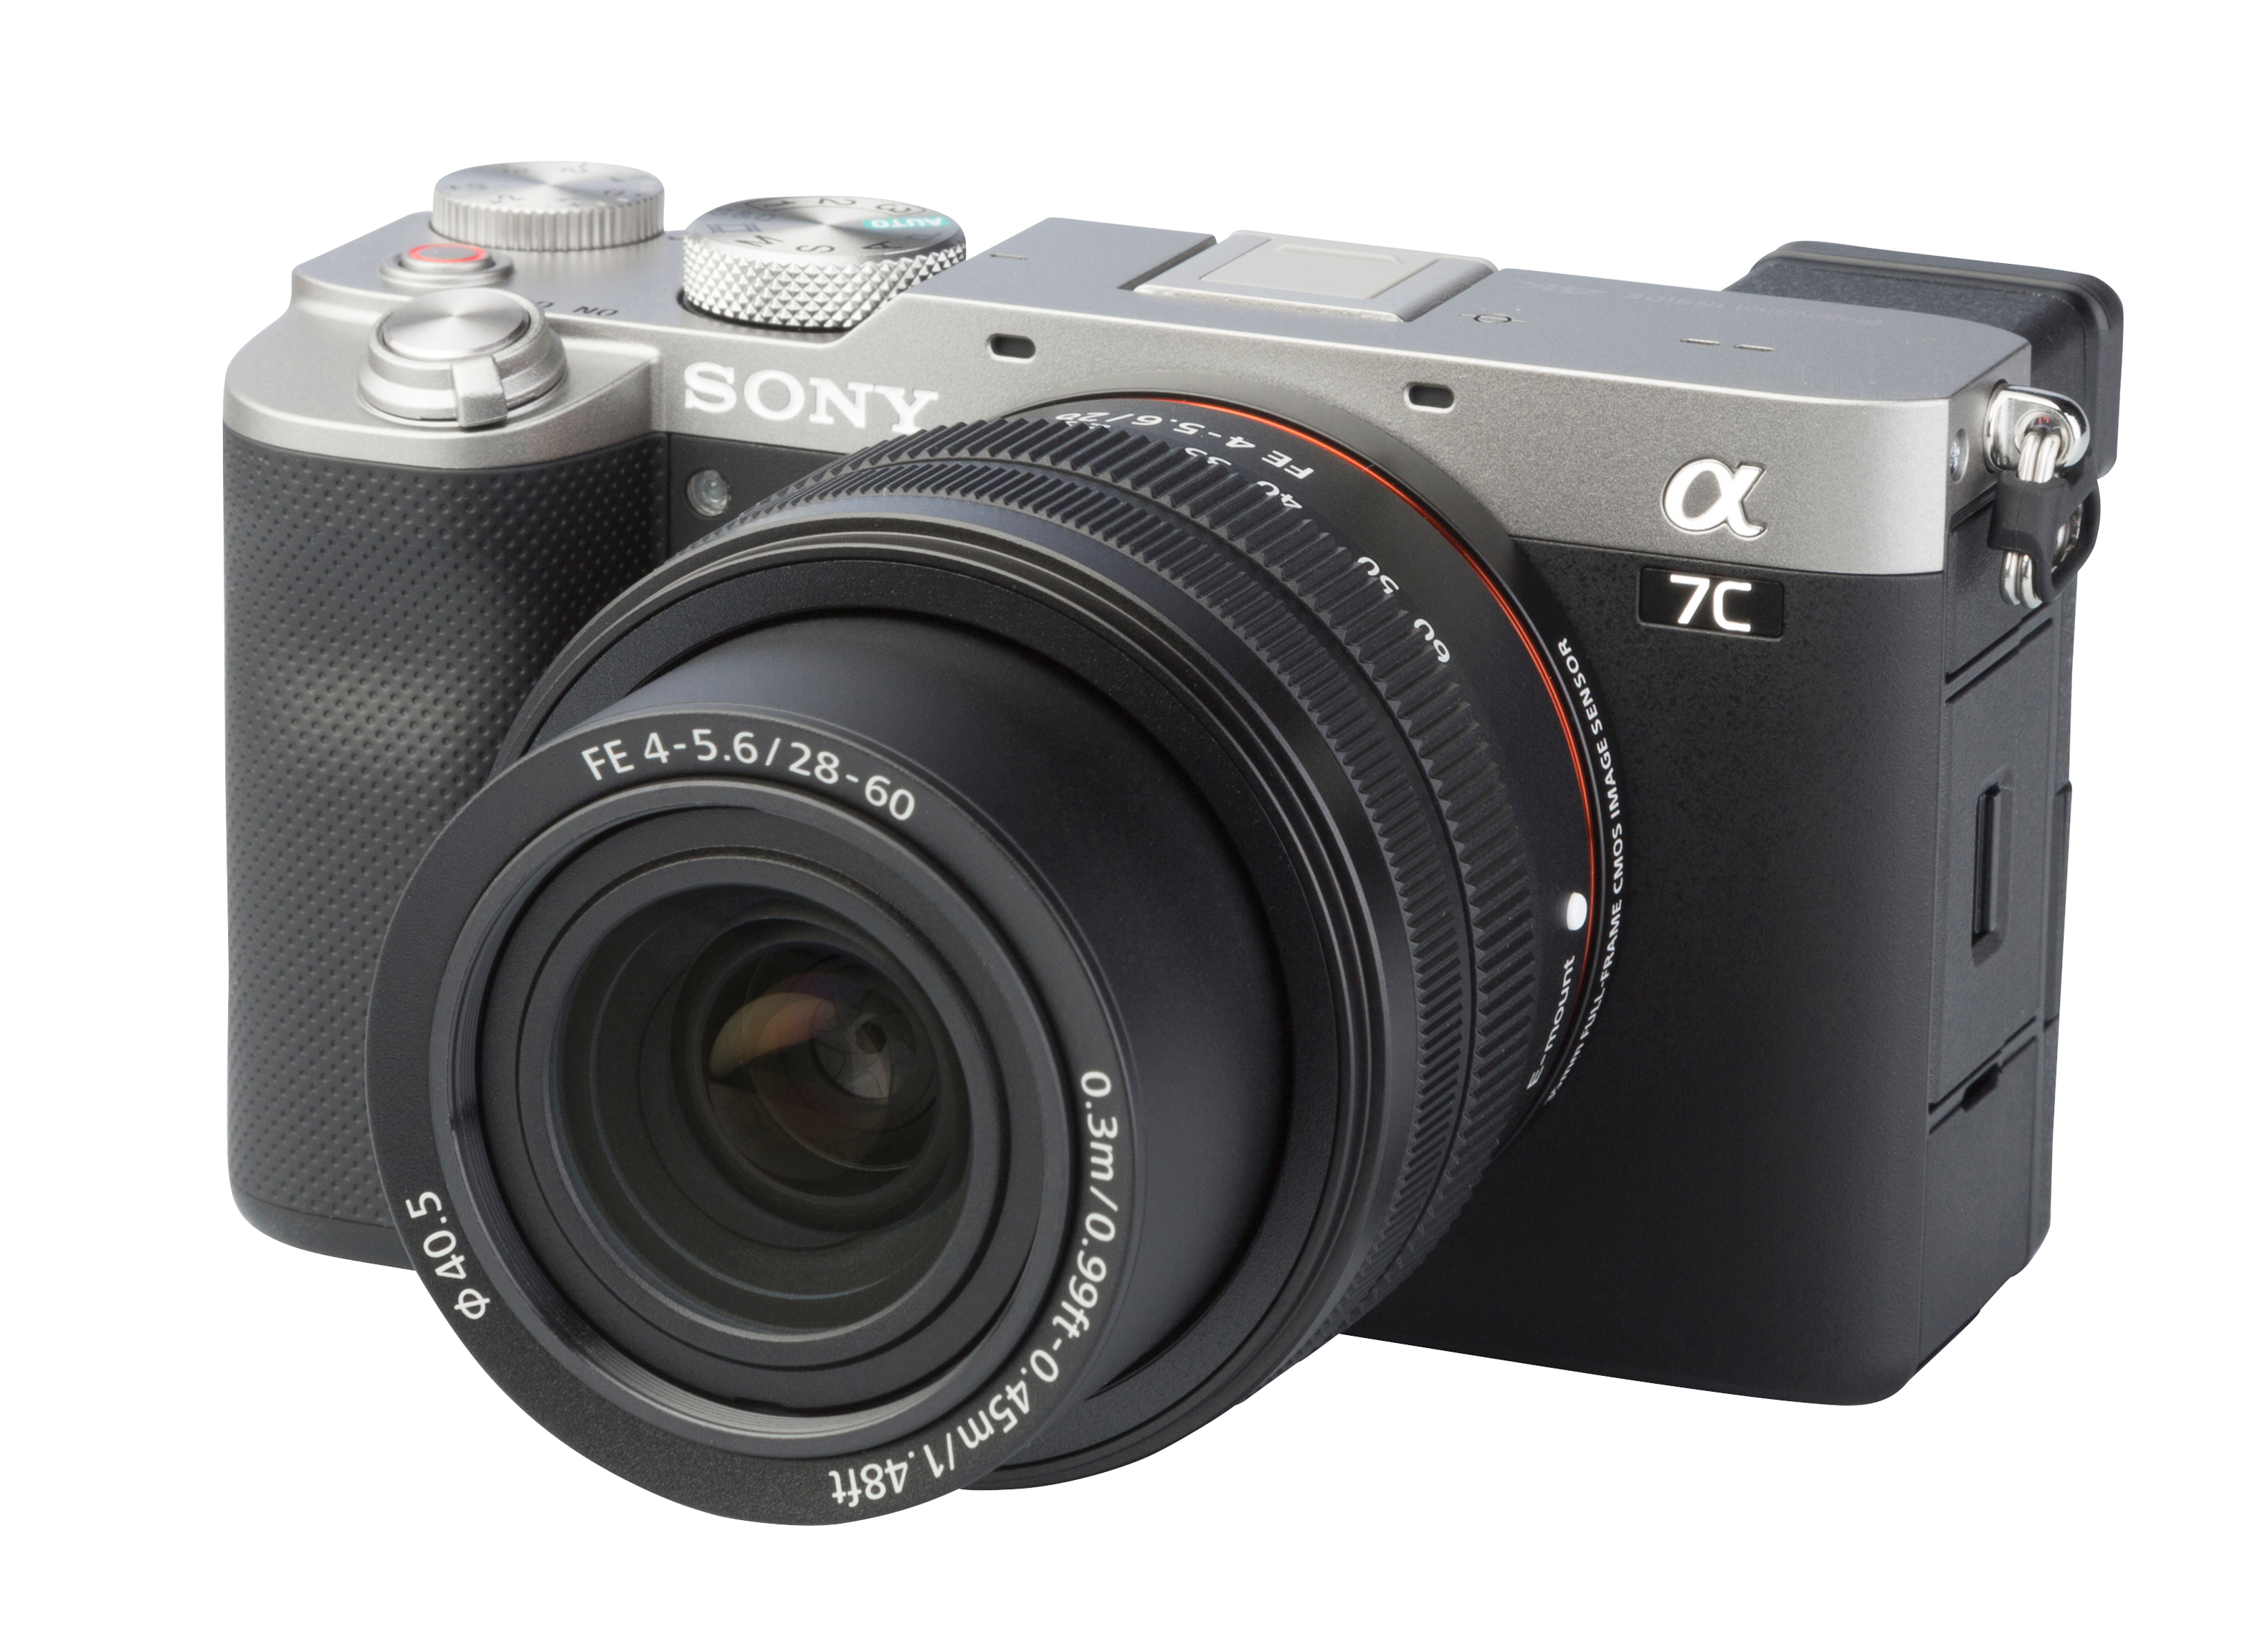 Sony Alpha 7C w/ FE 28-60mm Camera Review - Consumer Reports